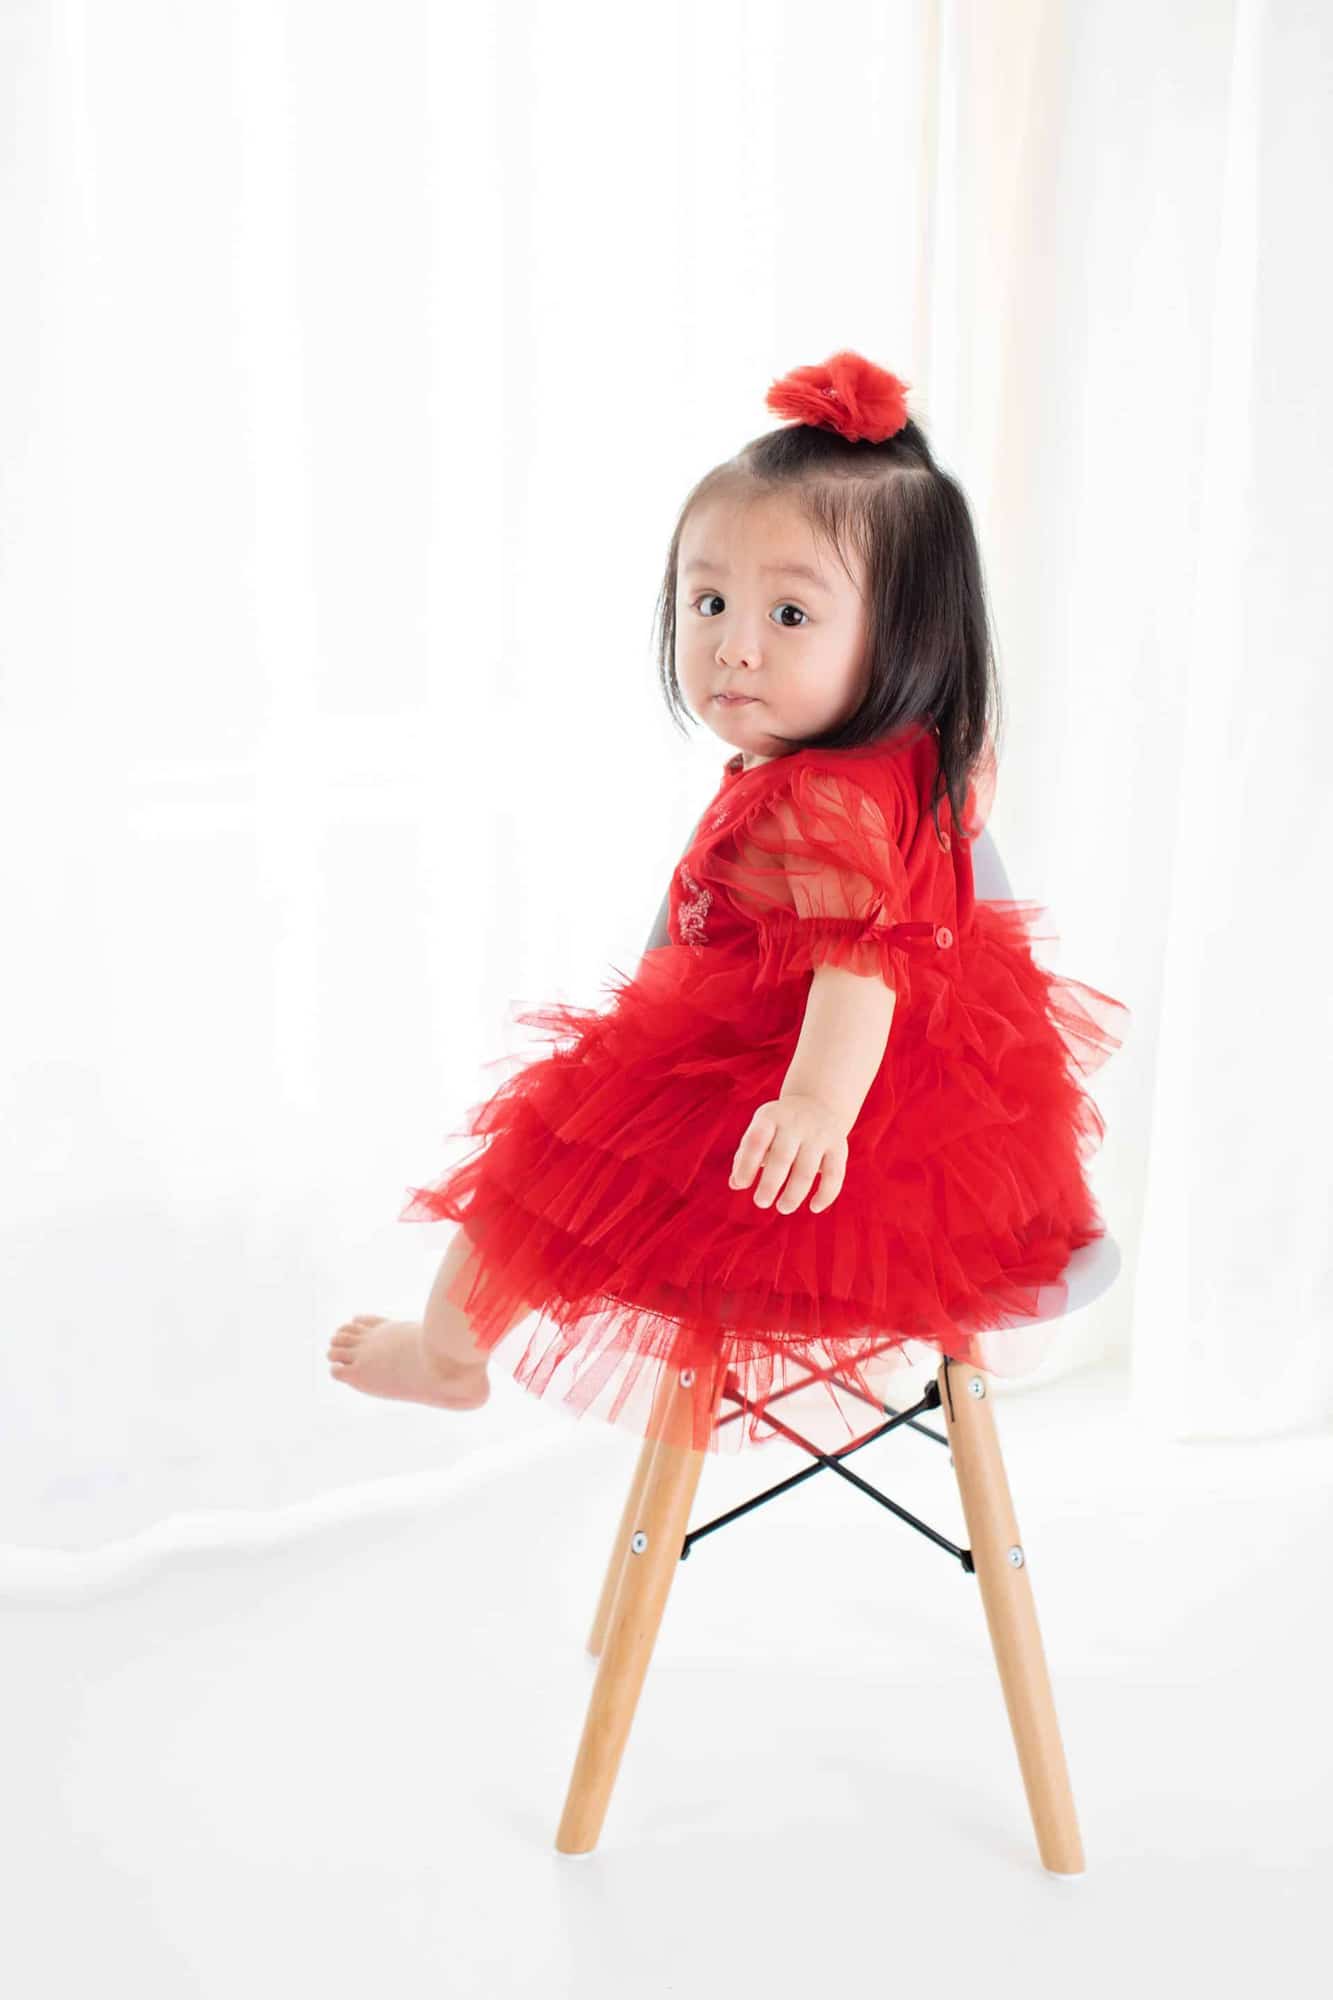 A girl in a bright red dress sits on a stool.